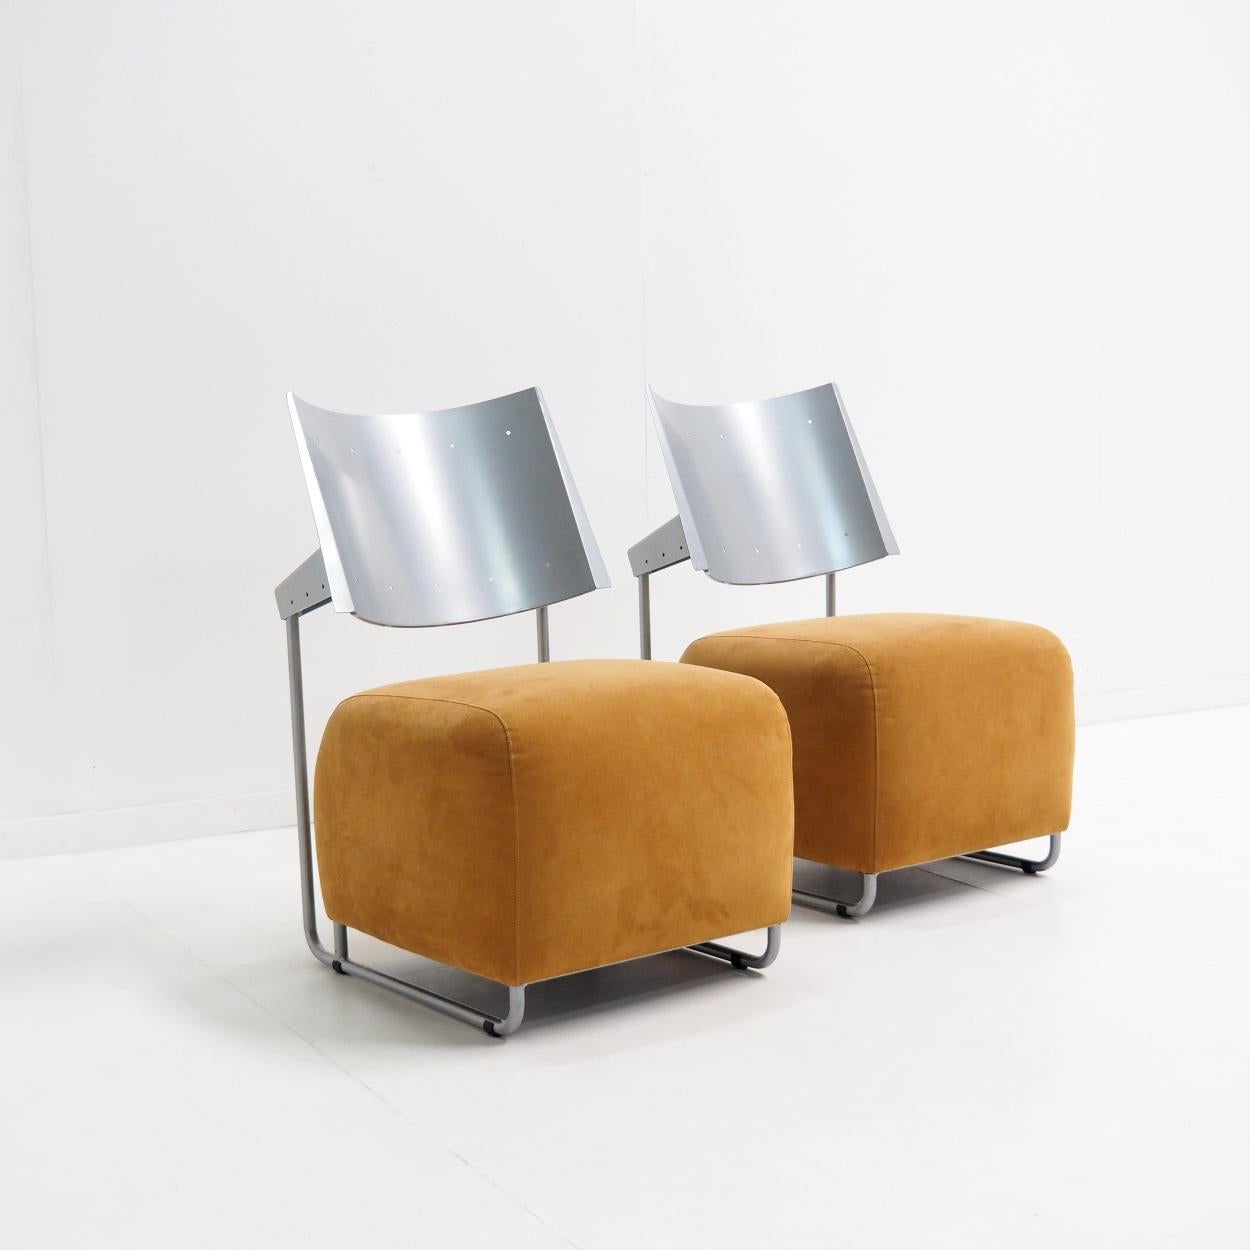 Beautiful set of postmodern chairs designed by the Finnish designer Harri Korhonen for his company Inno Interior Oy. The chairs were designed in 1989 and this set was probably produced in the 1990s.

The chairs are made of an aluminum steel frame